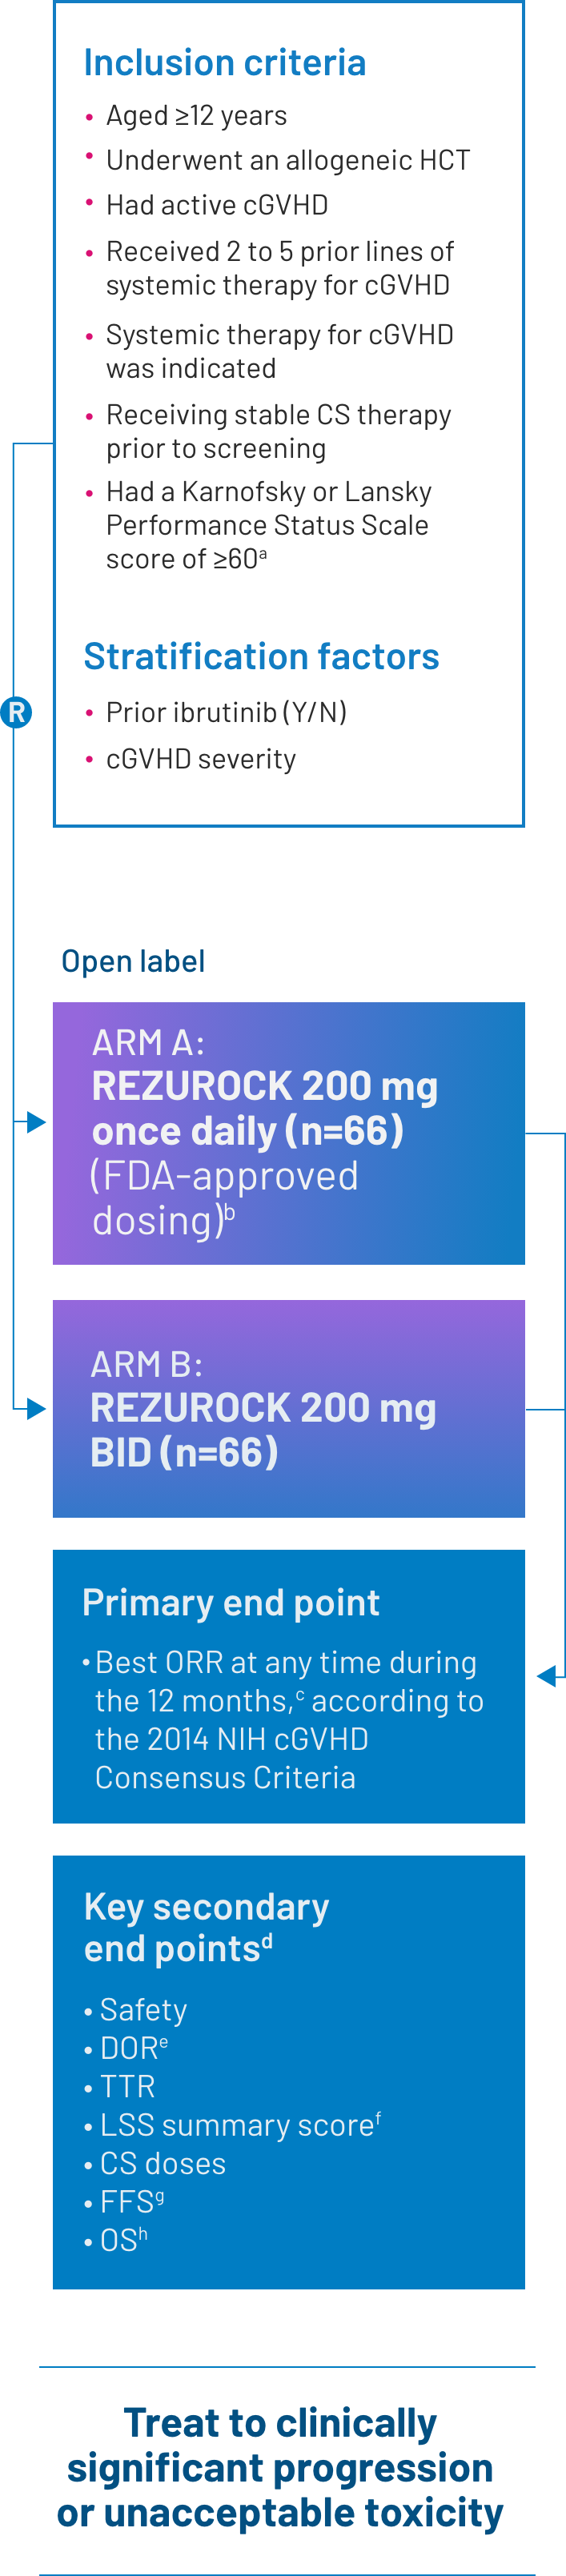 ROCKstar study criteria with REZUROCK treatment arms and end points, including overall response rate (ORR), safety, duration of response (DOR), Lee Symptom Scale (LSS) score, steroid doses, failure-free survival (FFS) and overall survival (OS)